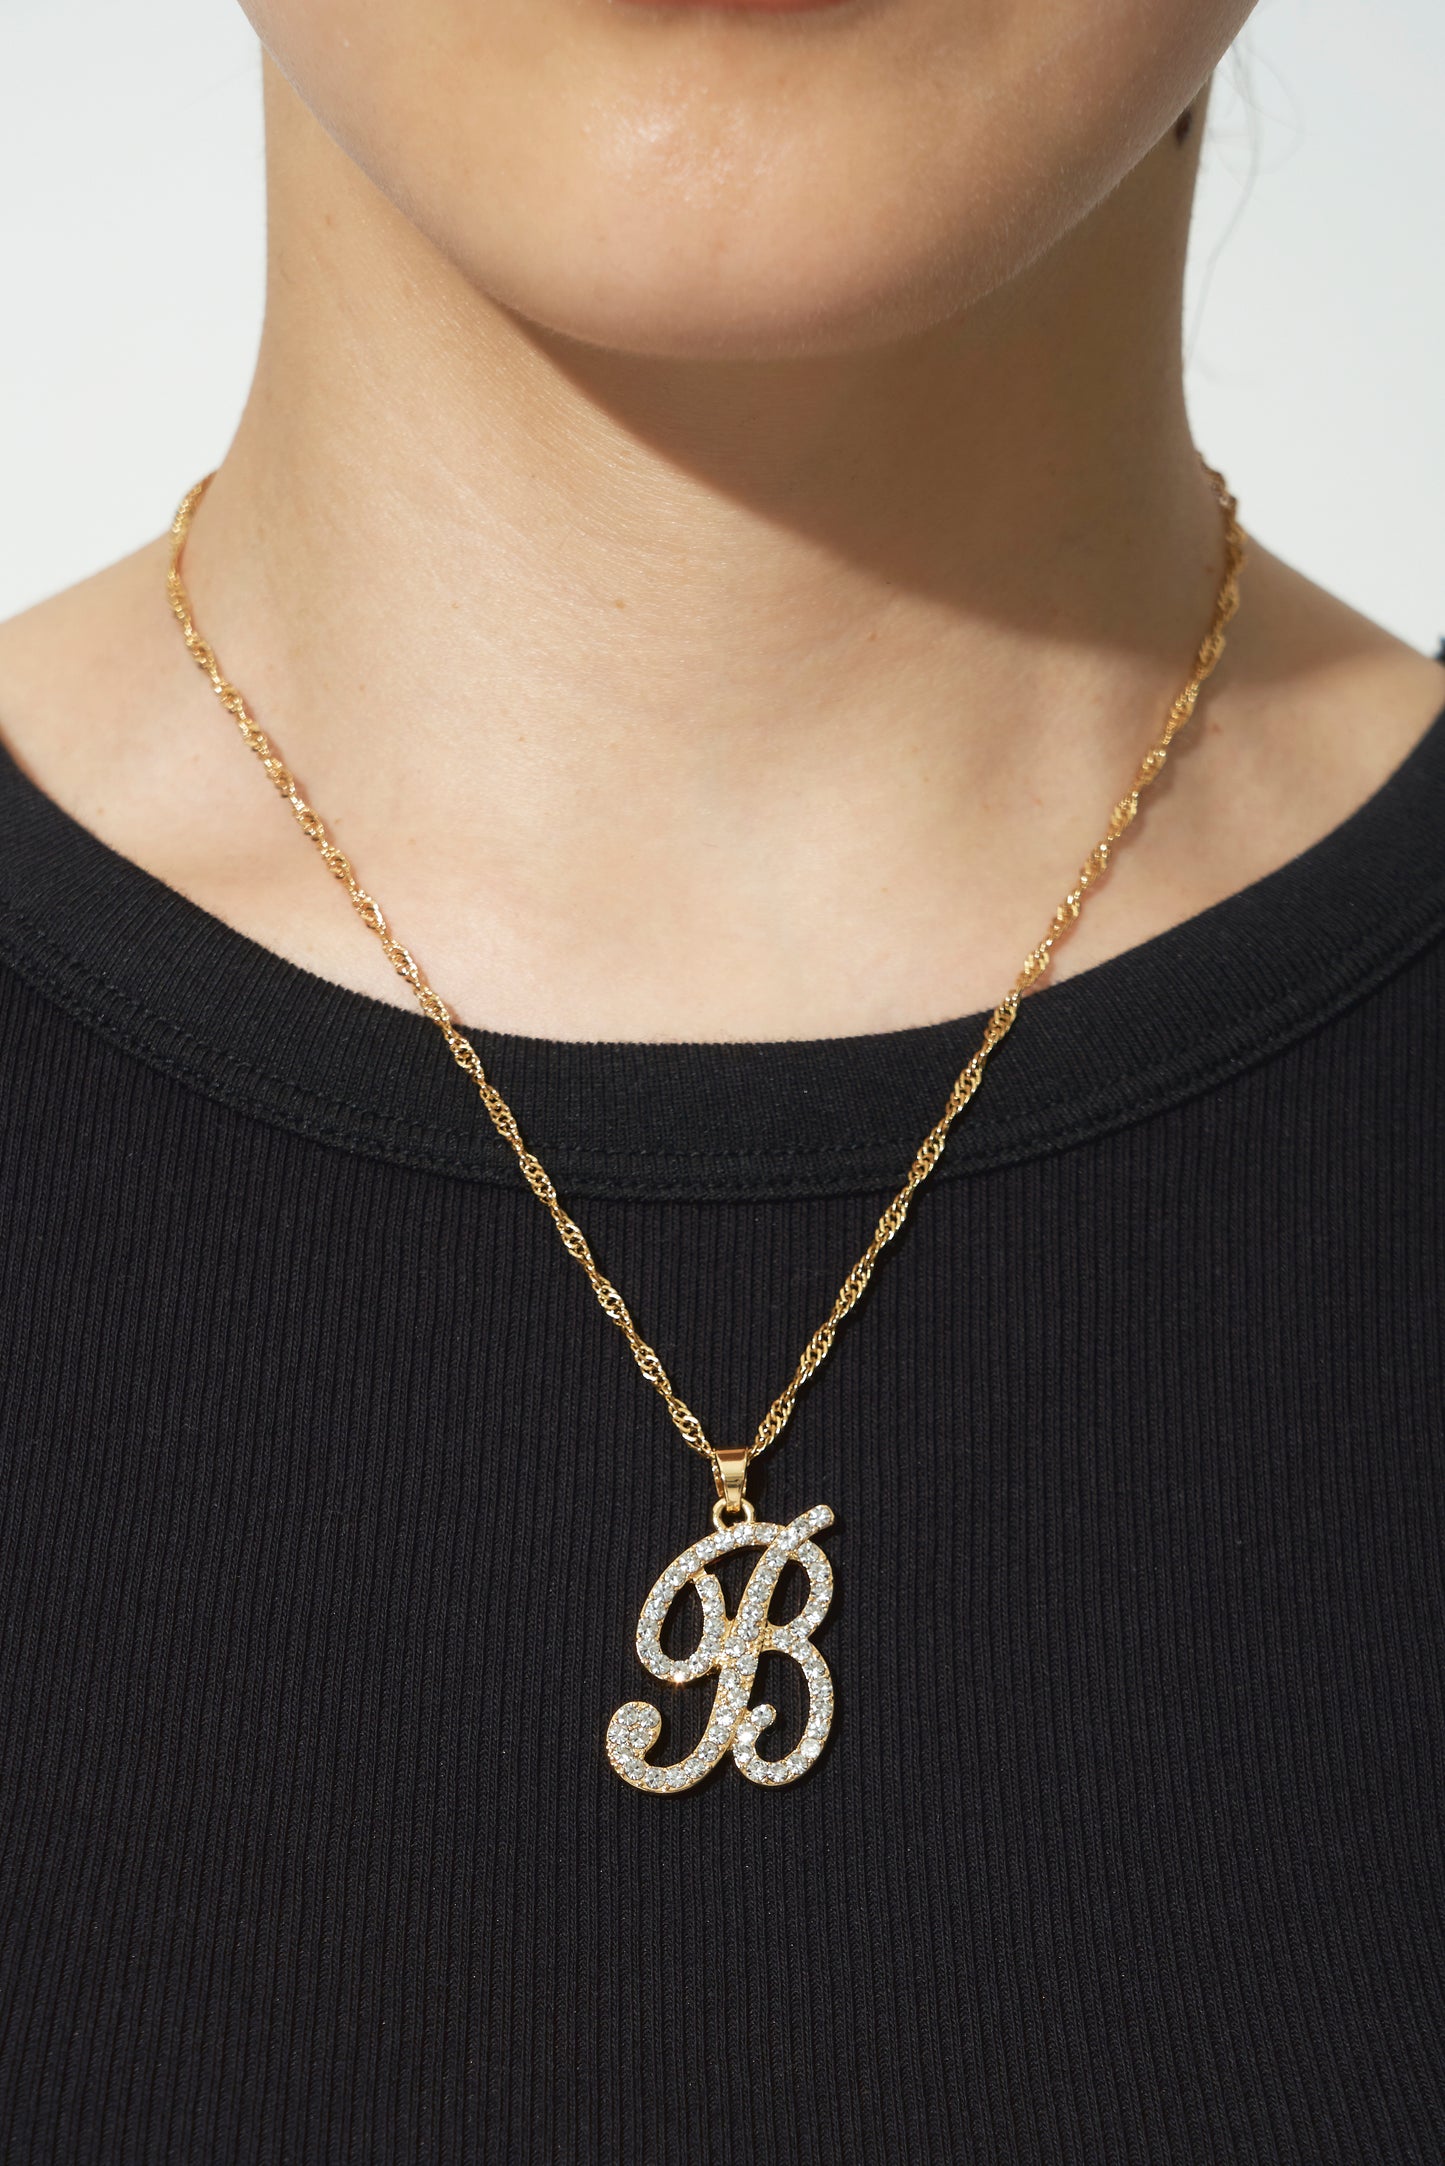 ICY “B”NECKLACE